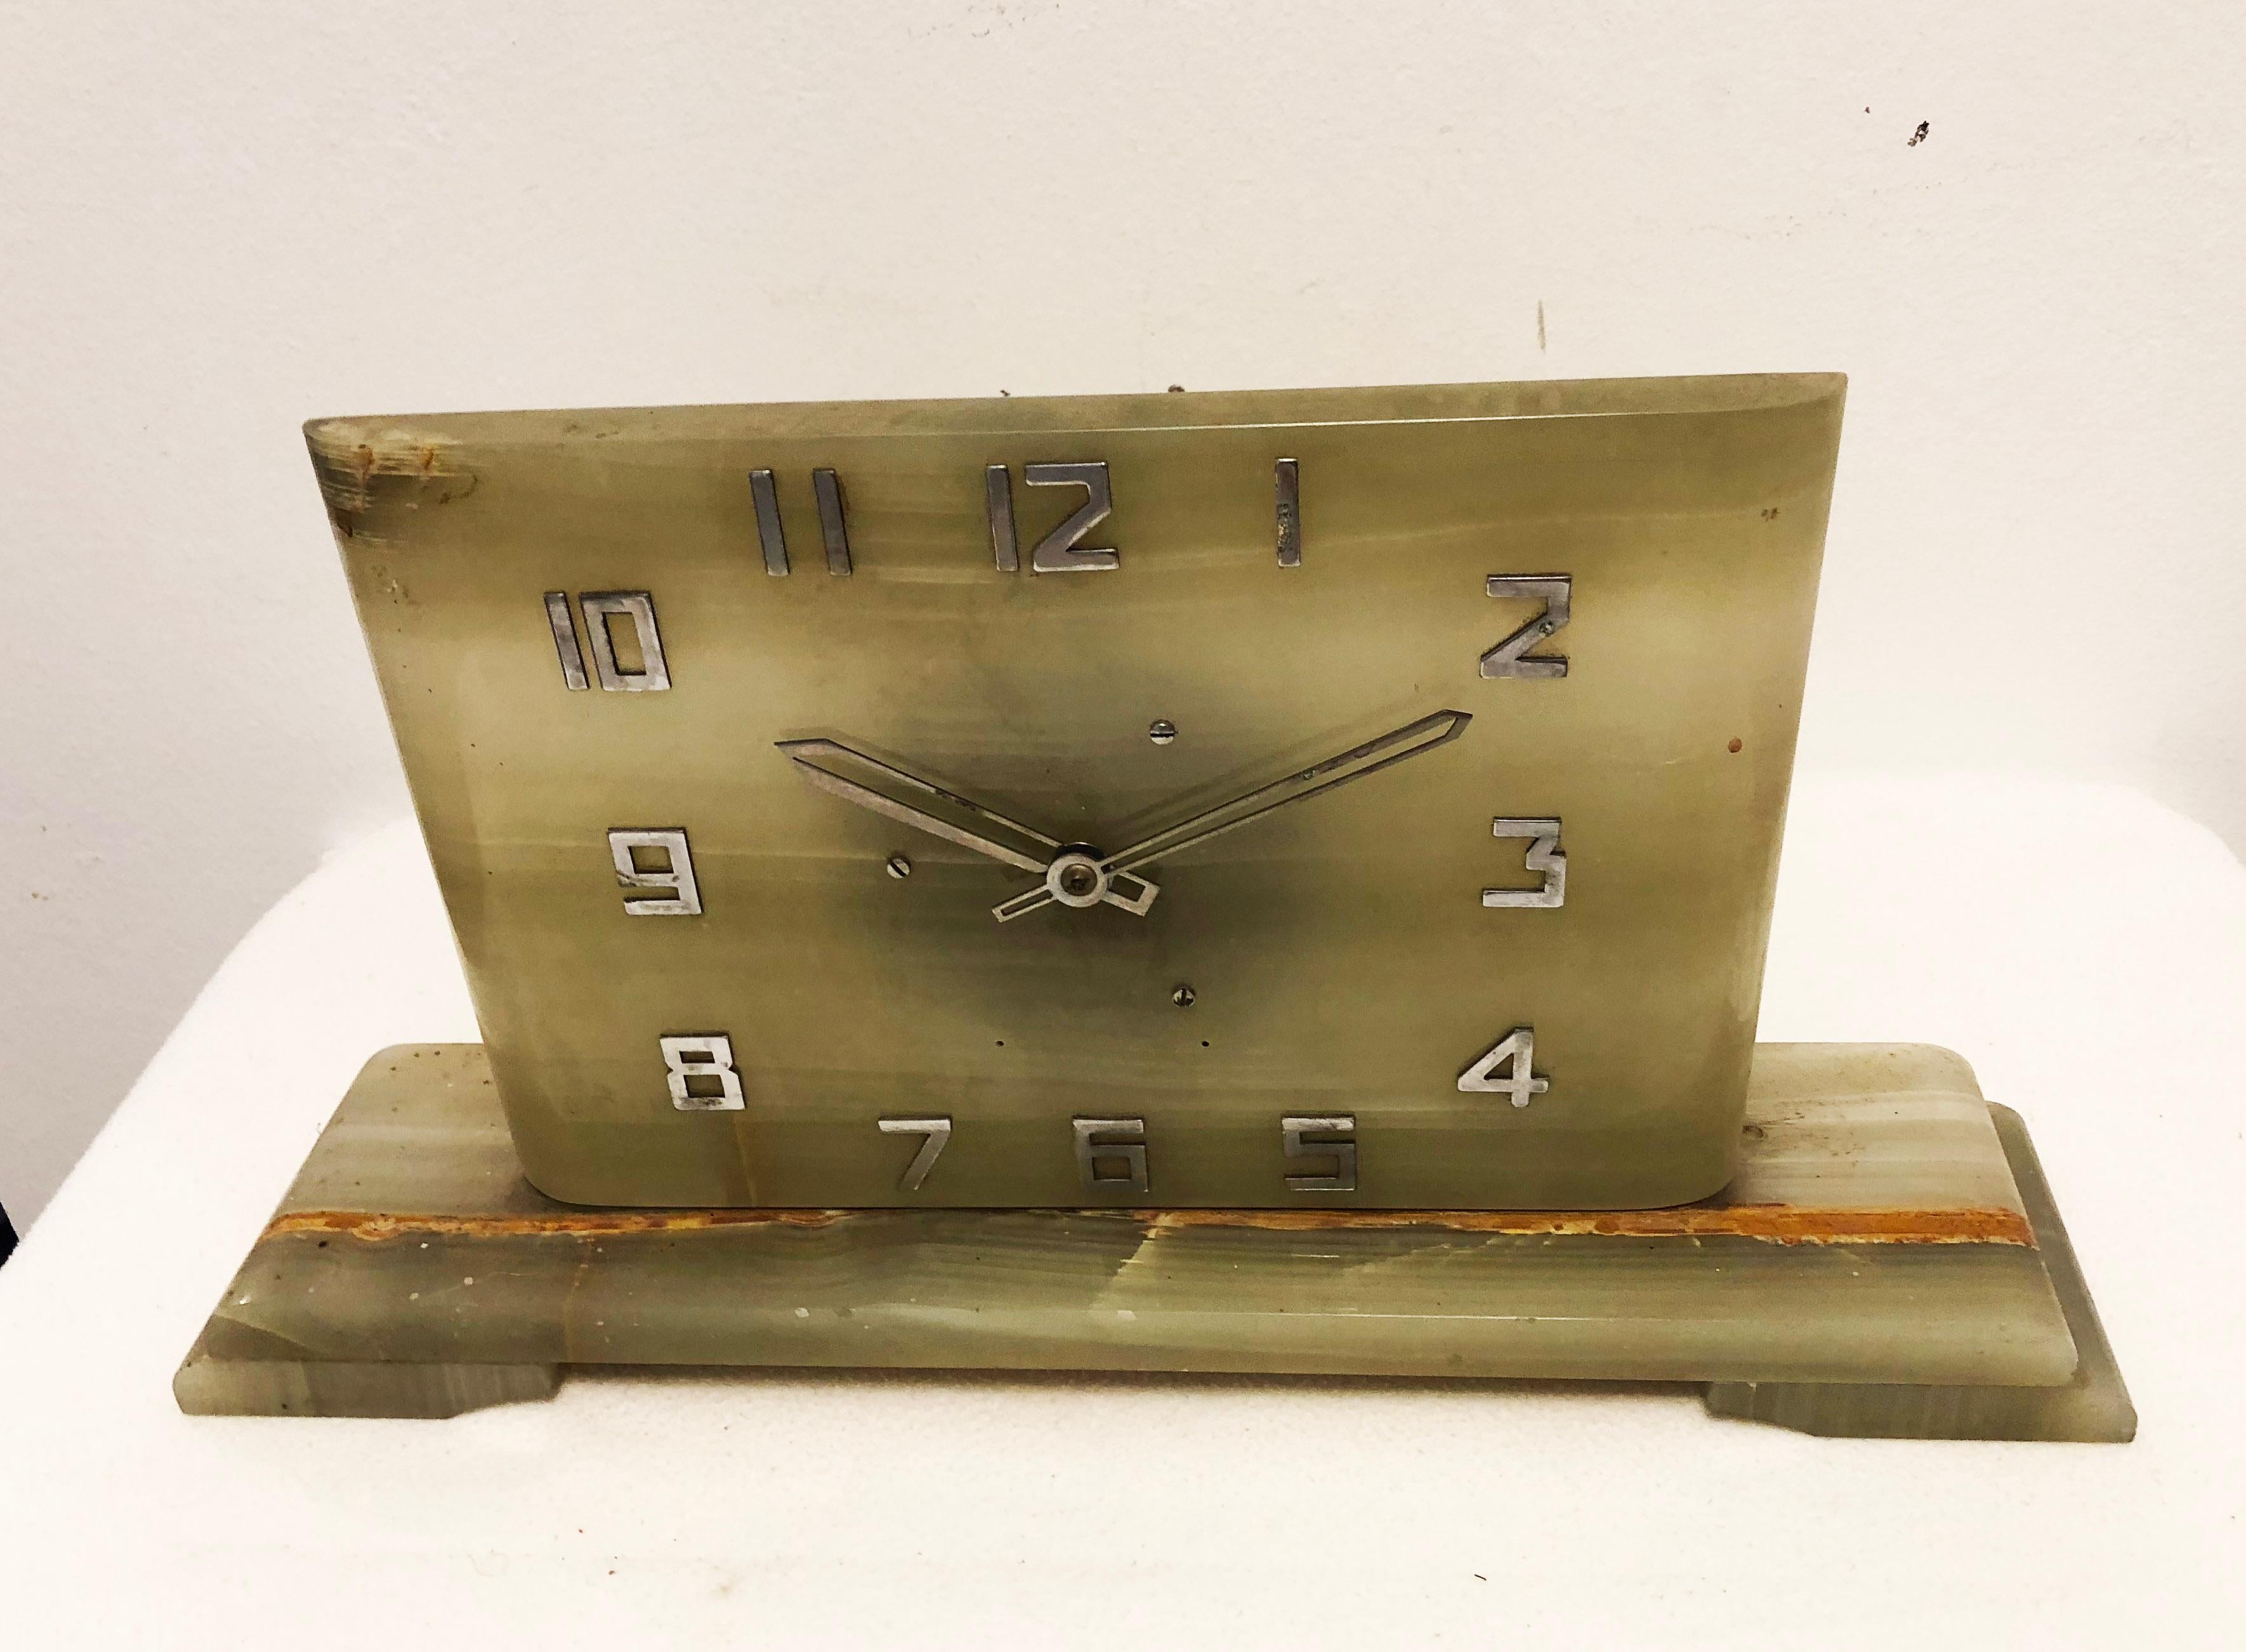 Green alabaster with brass digits and pointer nickel-plated, made in Germany in the 1930s.
Rebuild to a battery movement (pictures show the clock before the rebuild).